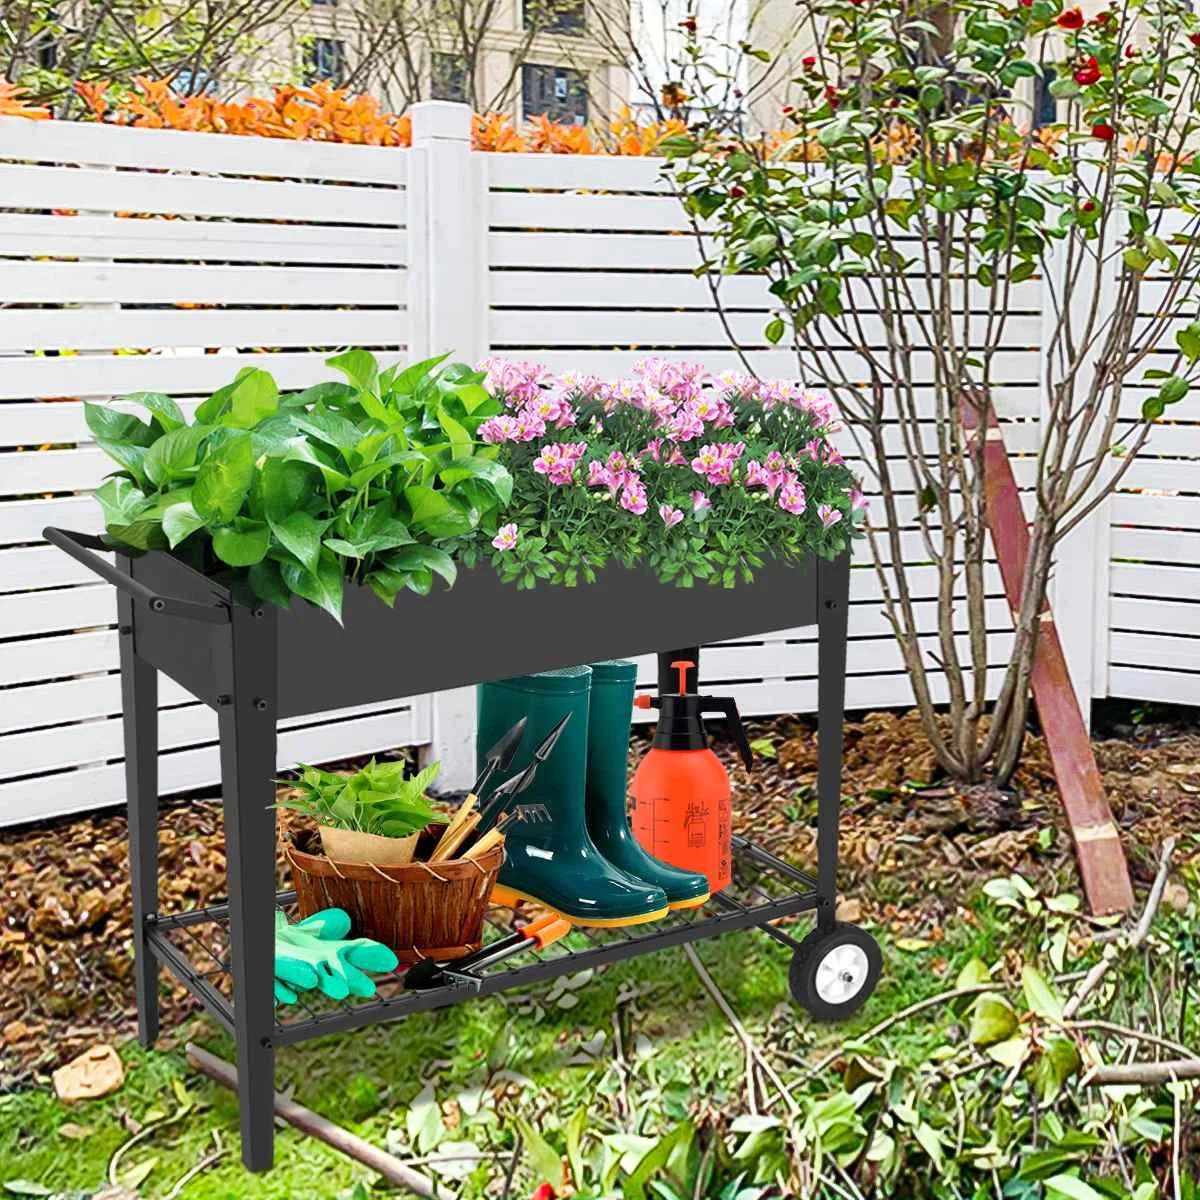 Mobile Raised 2 Tier Garden Bed Herb Yard Above Ground Raised Planter Boxes with 2 Wheel Garden Cart for Vegetables Flower Patio